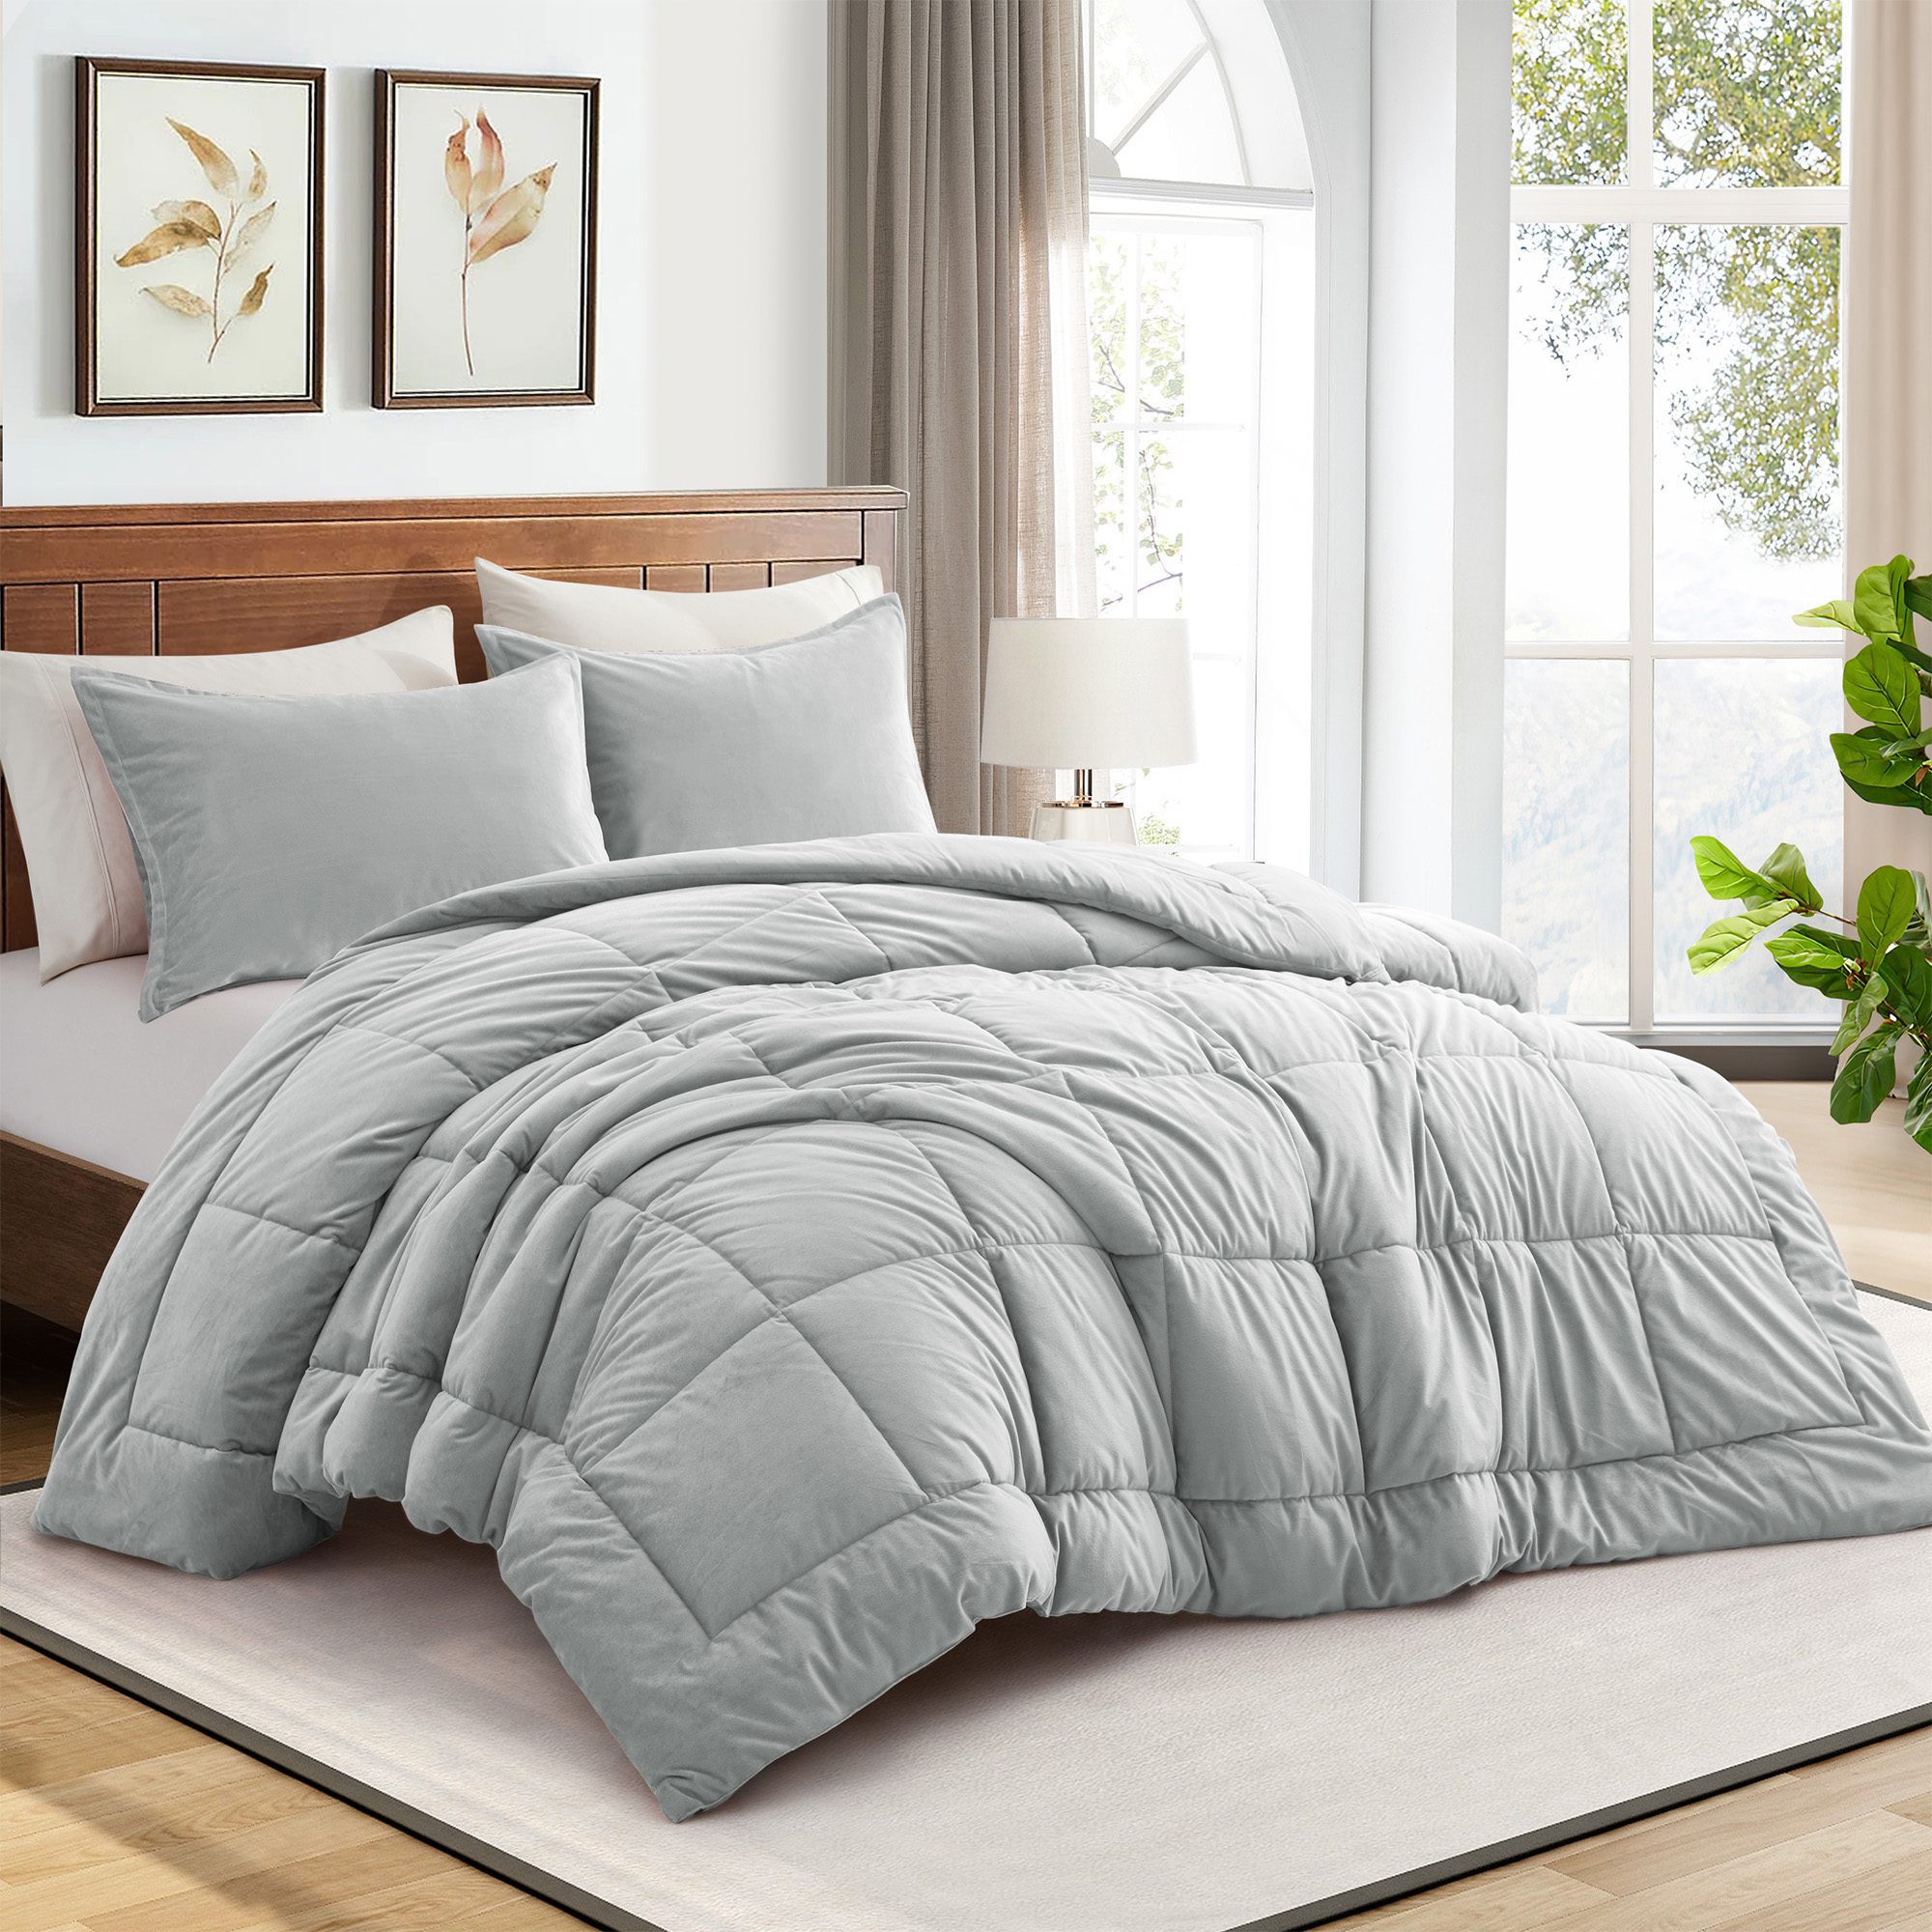 2 Or 3 Pieces Quilted Comforter All Season Down Alternative Reversible Ultra Soft Velet Duvet Insert - Twin Size